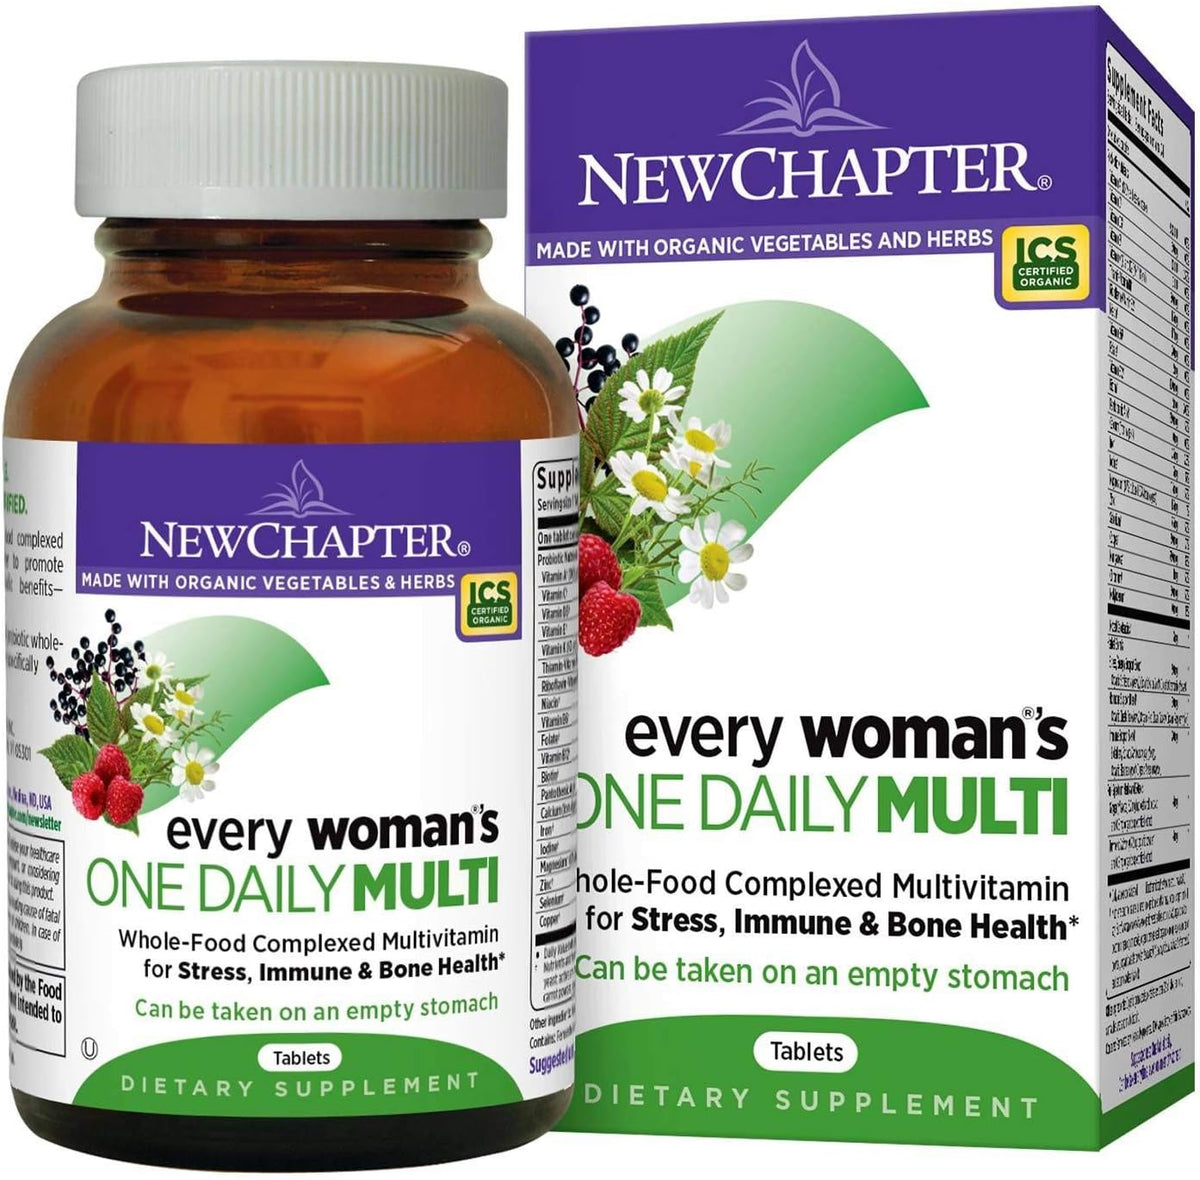 New Chapter Every woman's one daily MULTIVITAMINS 40+ with Nutrients for Stress, Immune and Bone Support 72 Vegetarian Tablets (Dietary Supplement) (Green)